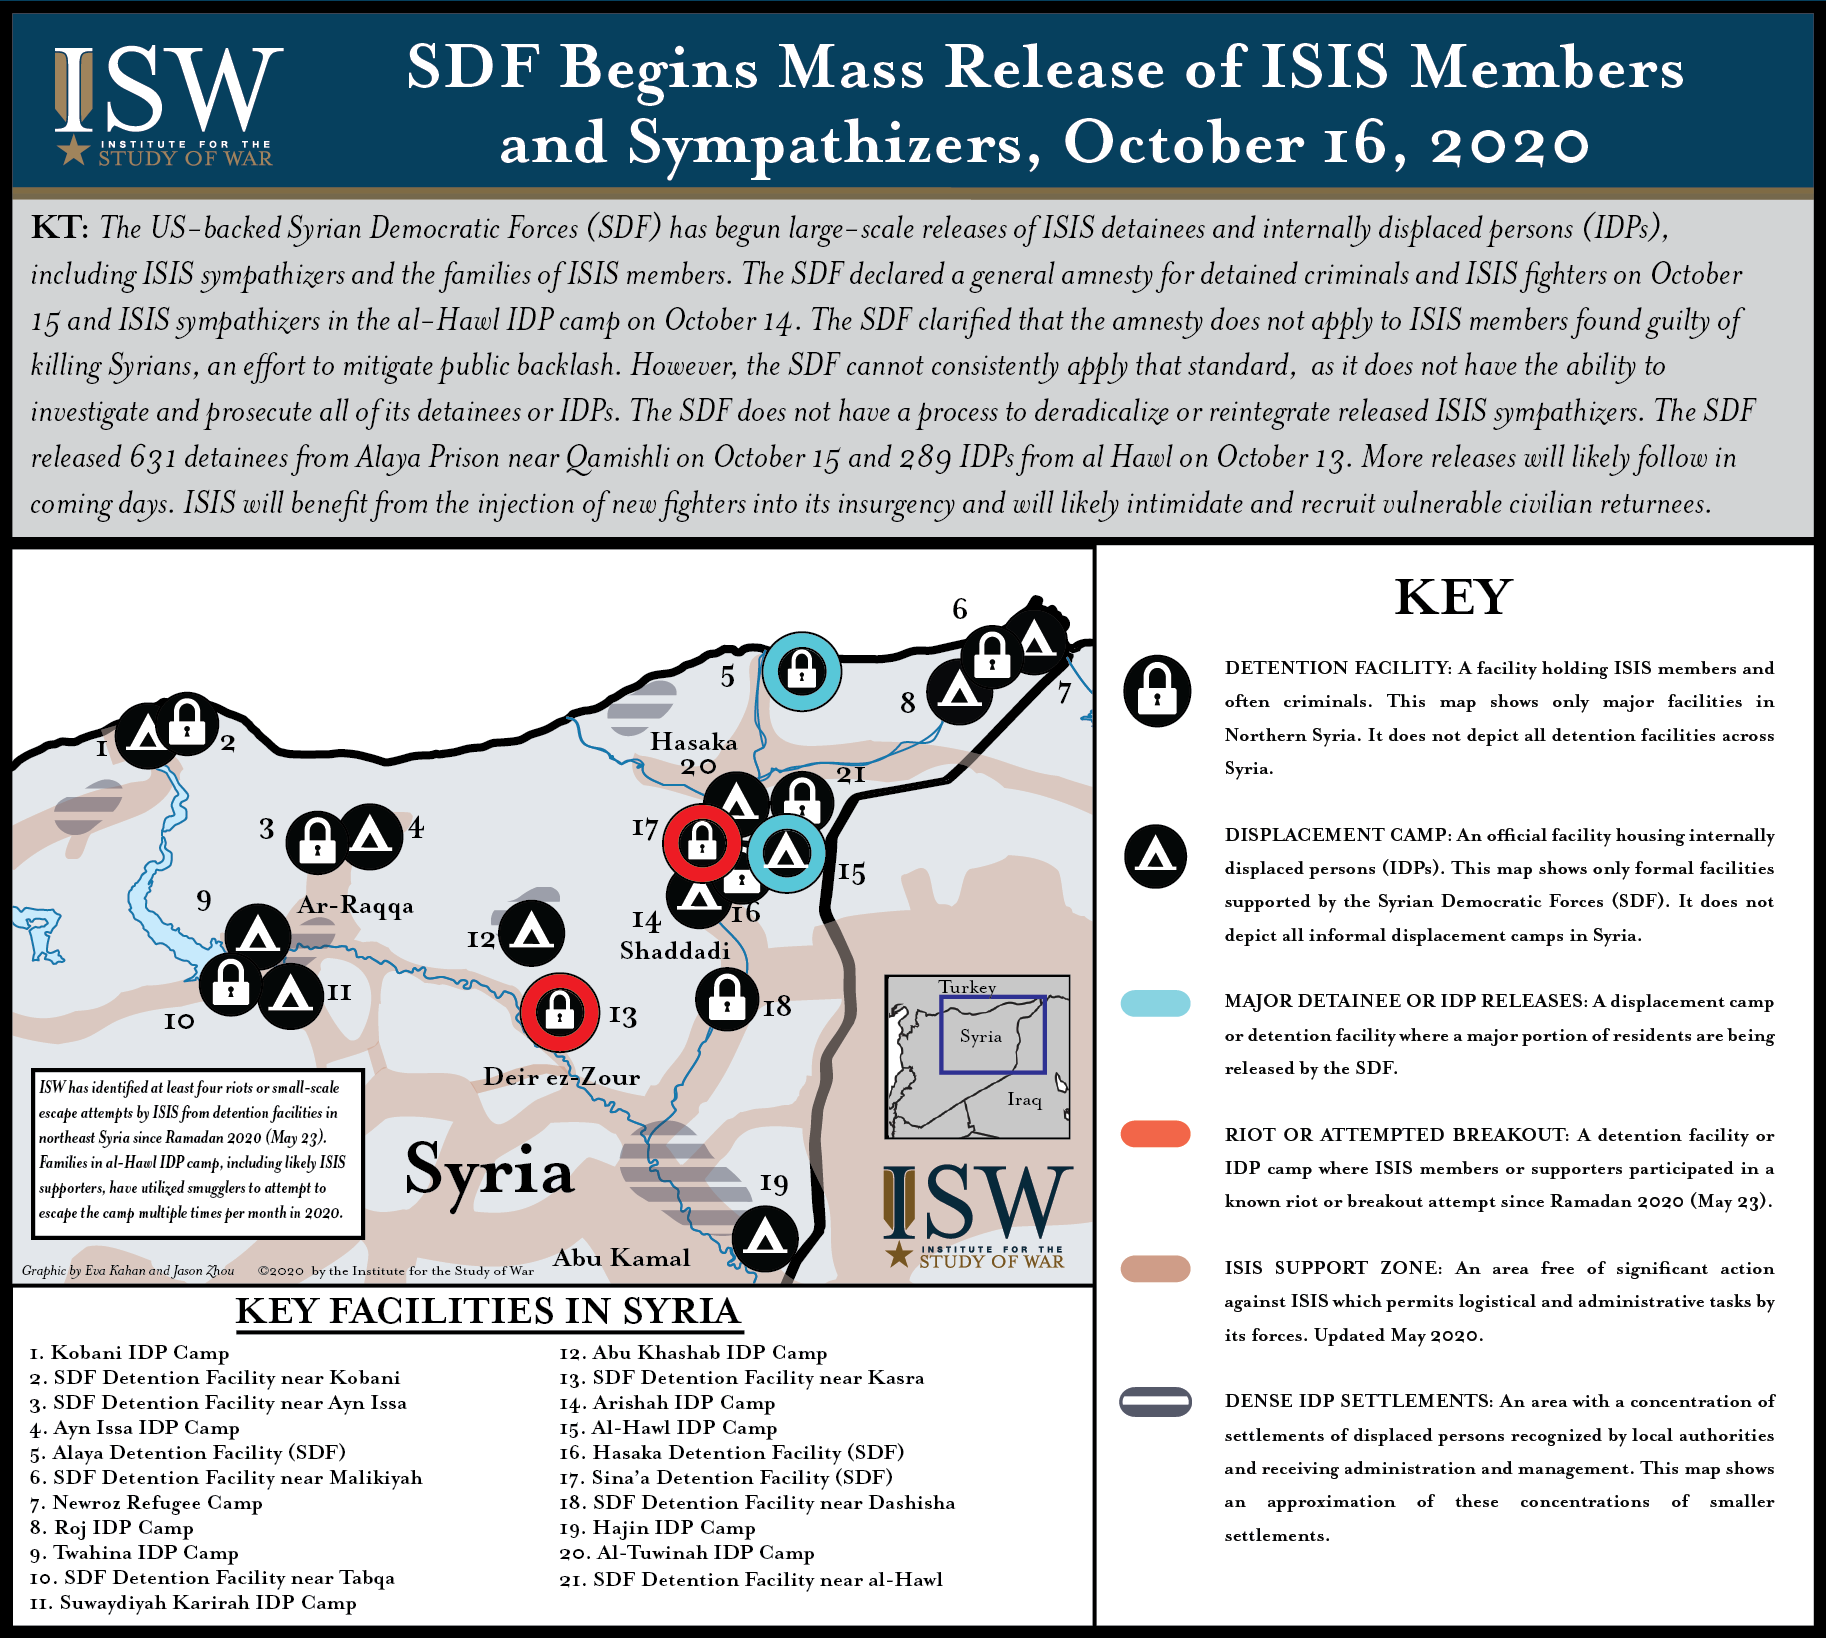 SDF Begins Mass Release of ISIS Members and Sympathizers in Syria |  Institute for the Study of War